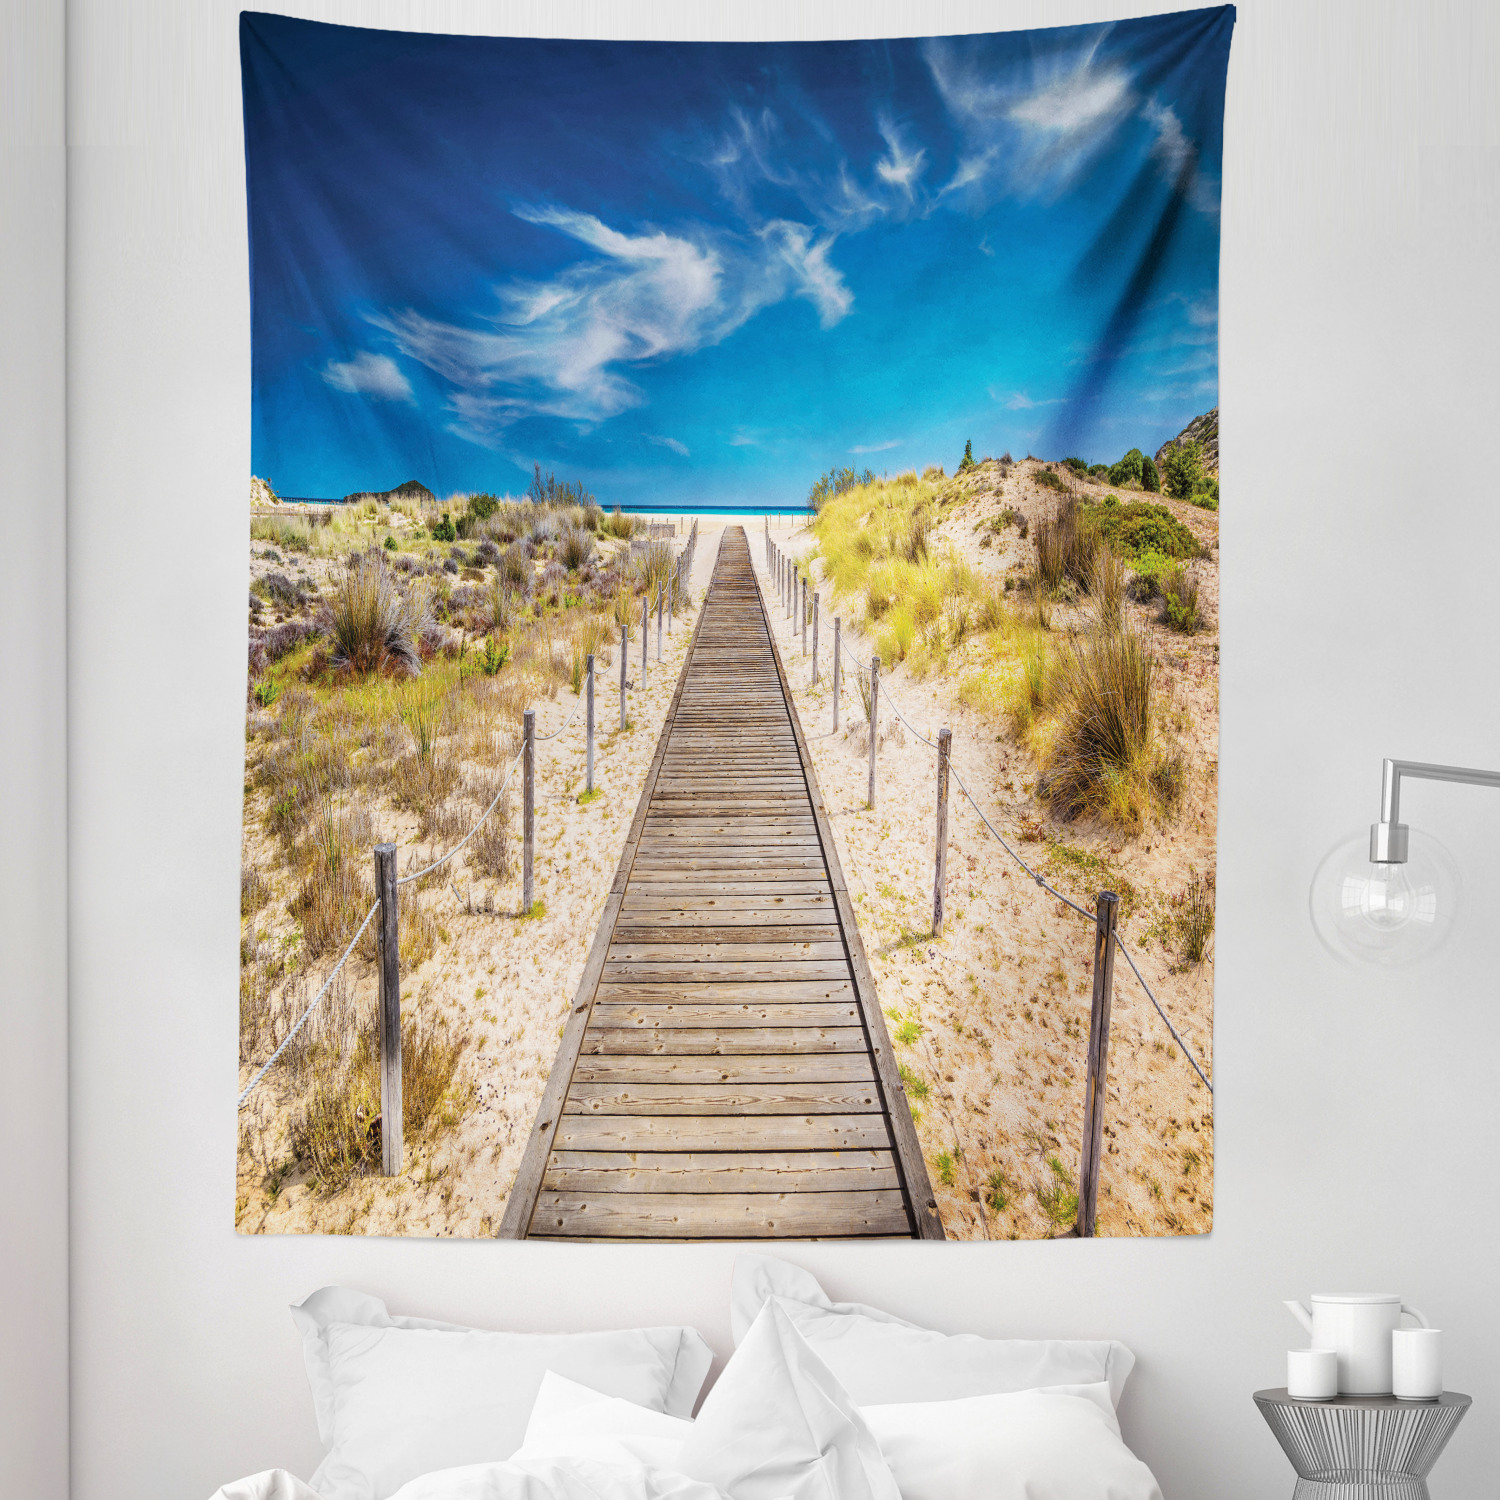 Beach Tapestry, Walkway into the Wild Idyllic Endless Sky Relaxing Resting  Tranquil Quiet Seashore, Fabric Wall Hanging Decor for Bedroom Living Room  Dorm, Sizes, Cream Blue, by Ambesonne